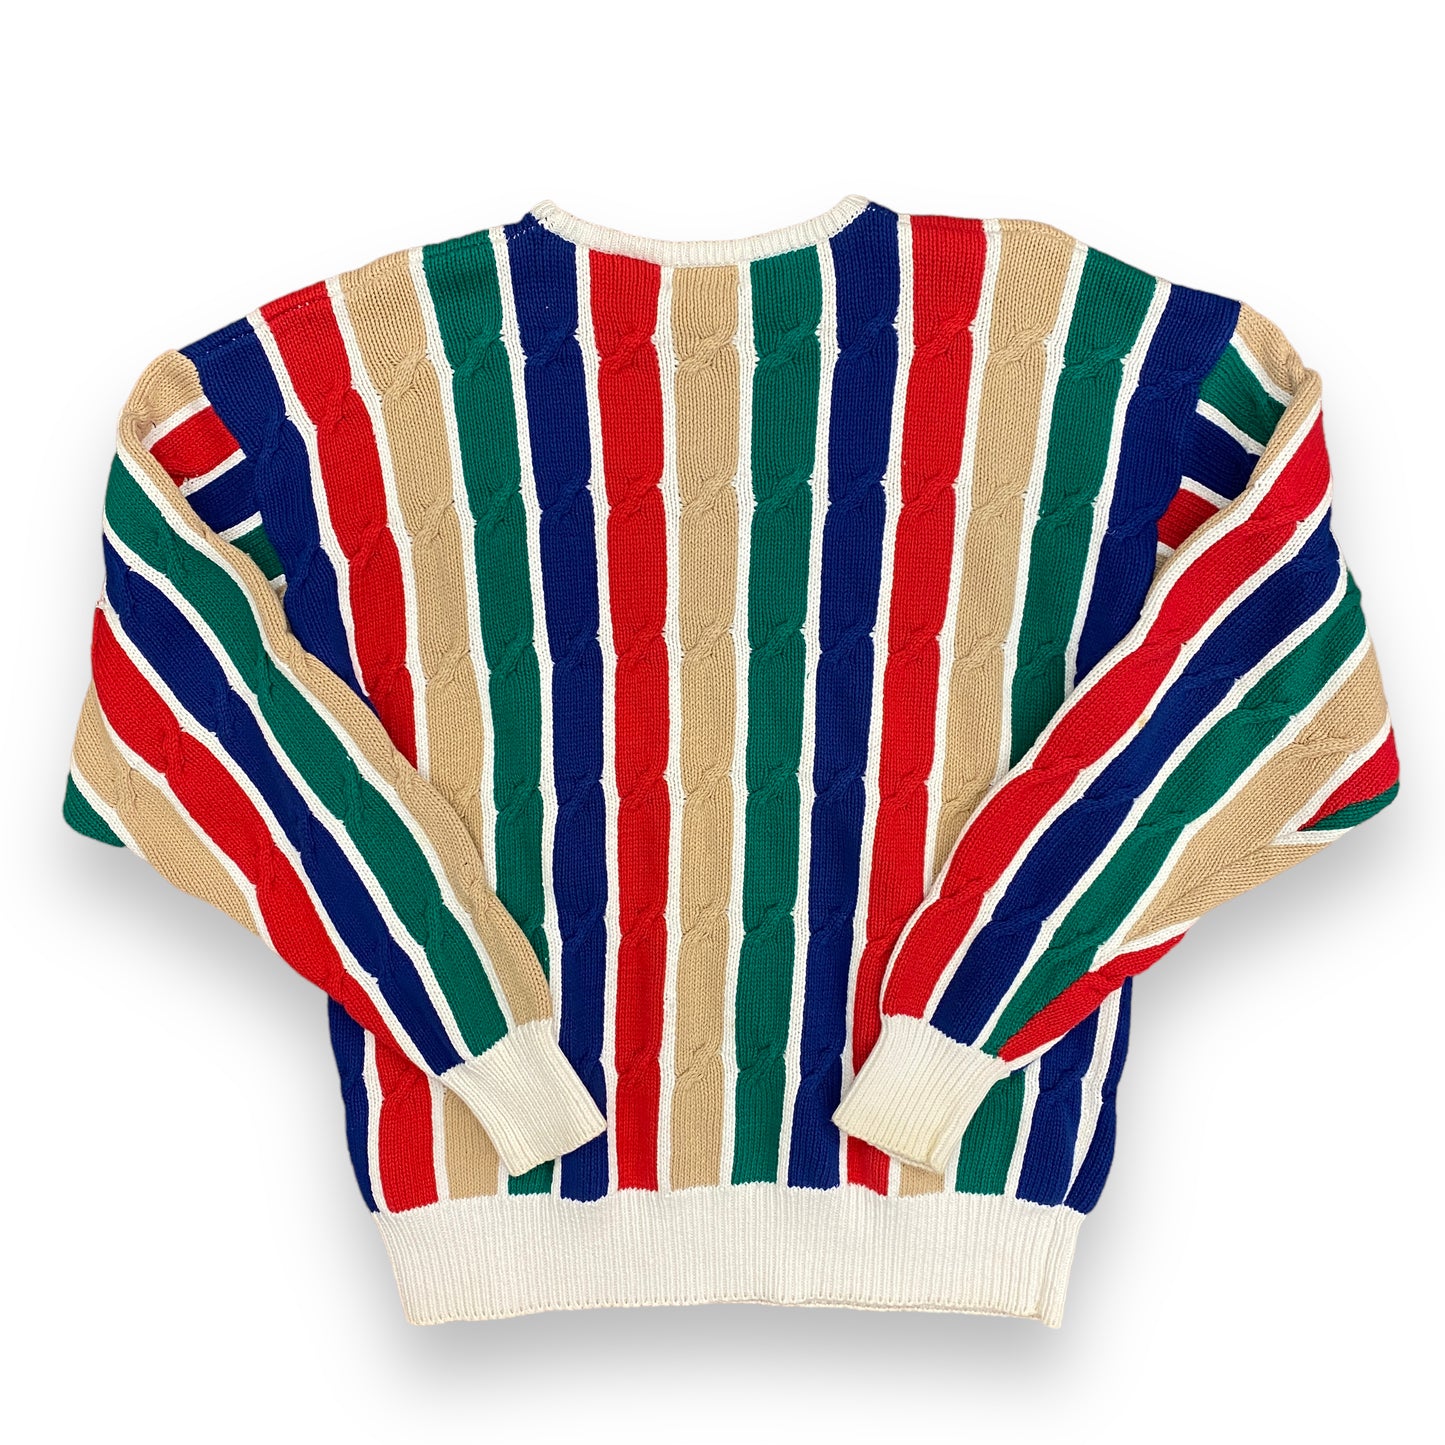 Vintage 1980s Stanley Blacker Striped Cable-Knit Sweater - Size Medium